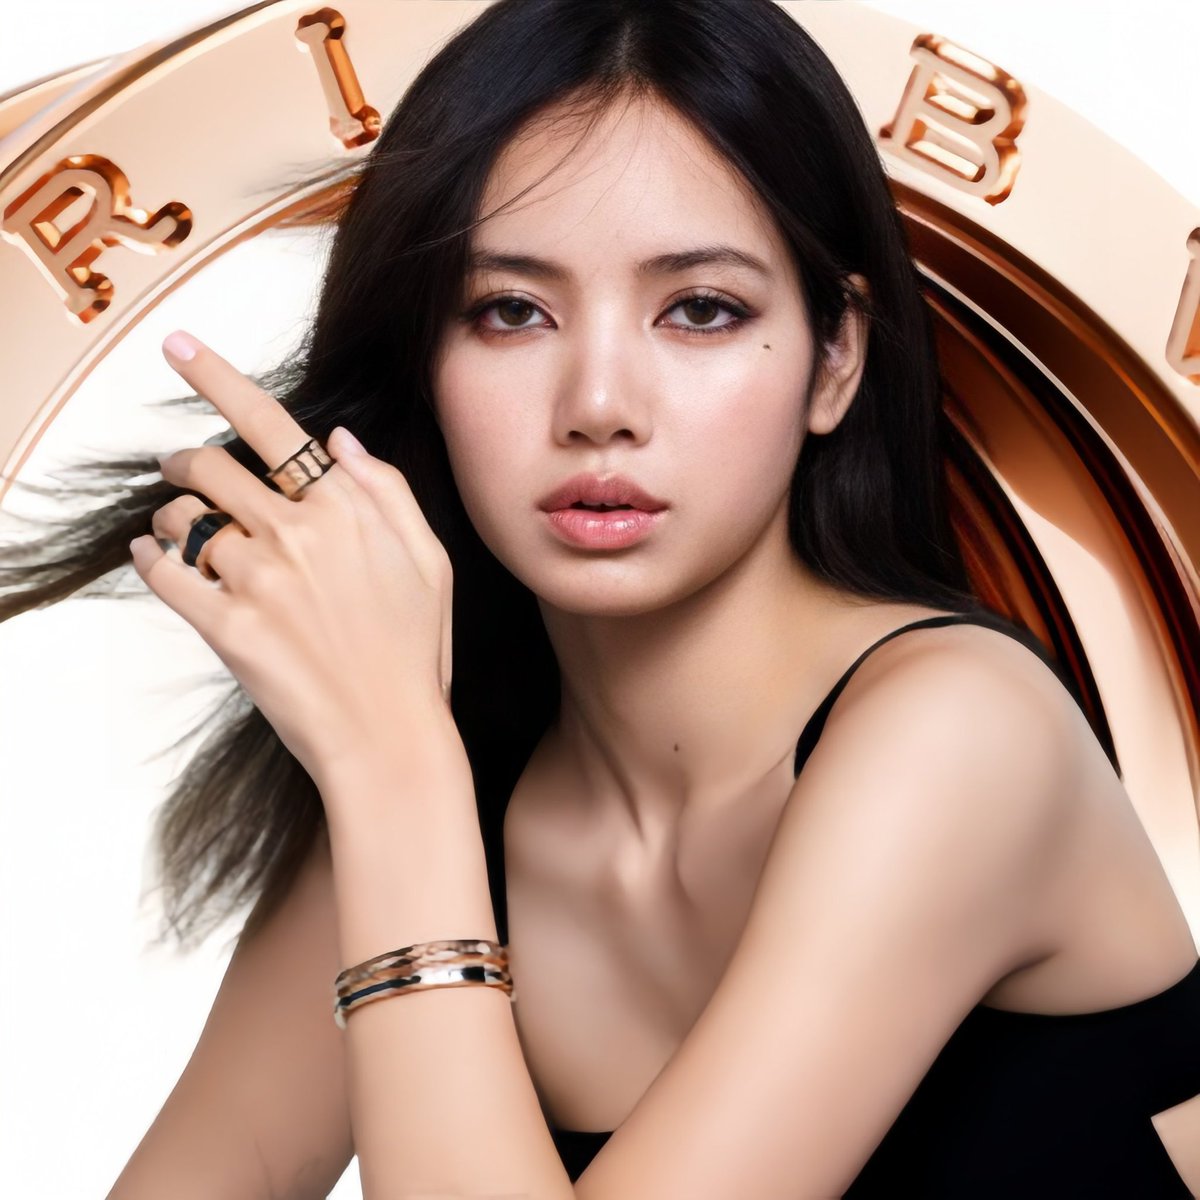 📸| jc.babin Instagram update with #LISA! 

“Bulgari Global Ambassador, @.lalalalisa_m showcases stunning B Zero1 ring and bracelets Jewelry fitting perfectly her contemporary irresistible styling. #starsinbvlgari”

LISA for BULGARI 
#LISAxBVLGARI #리사 #블랙핑크 #BLACKPINK…